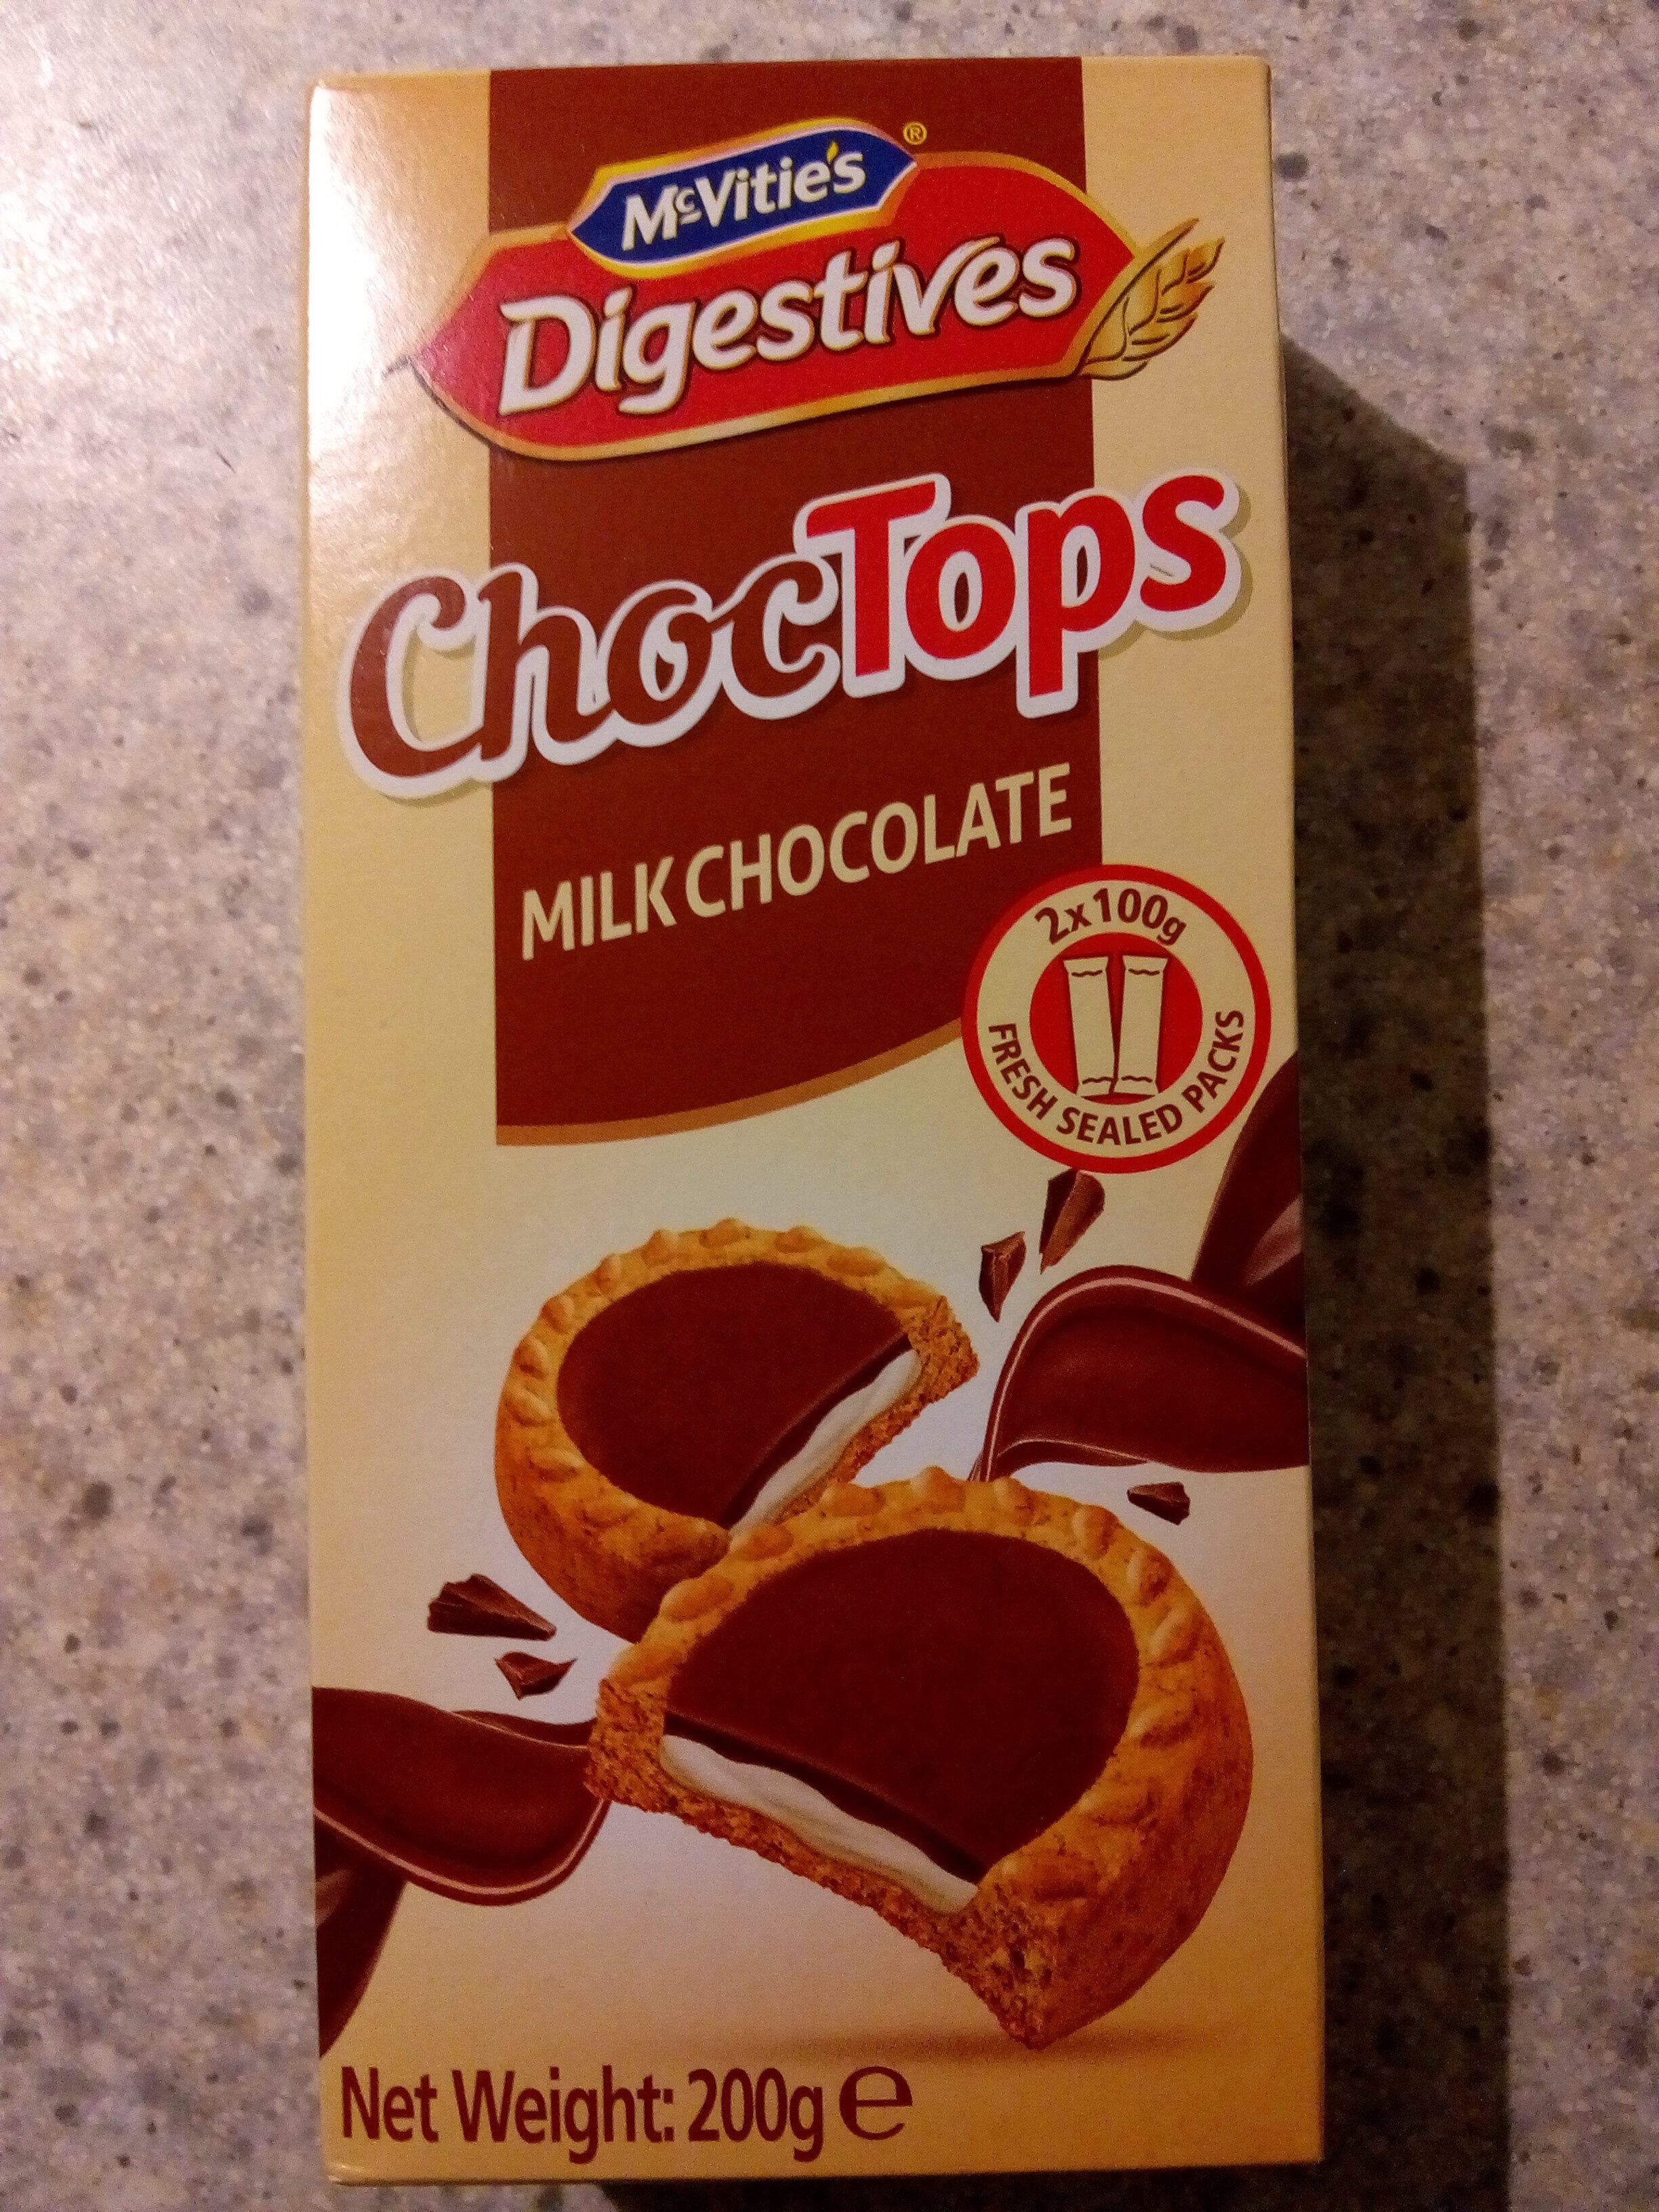 ChocTops Milk Chocolate - Product